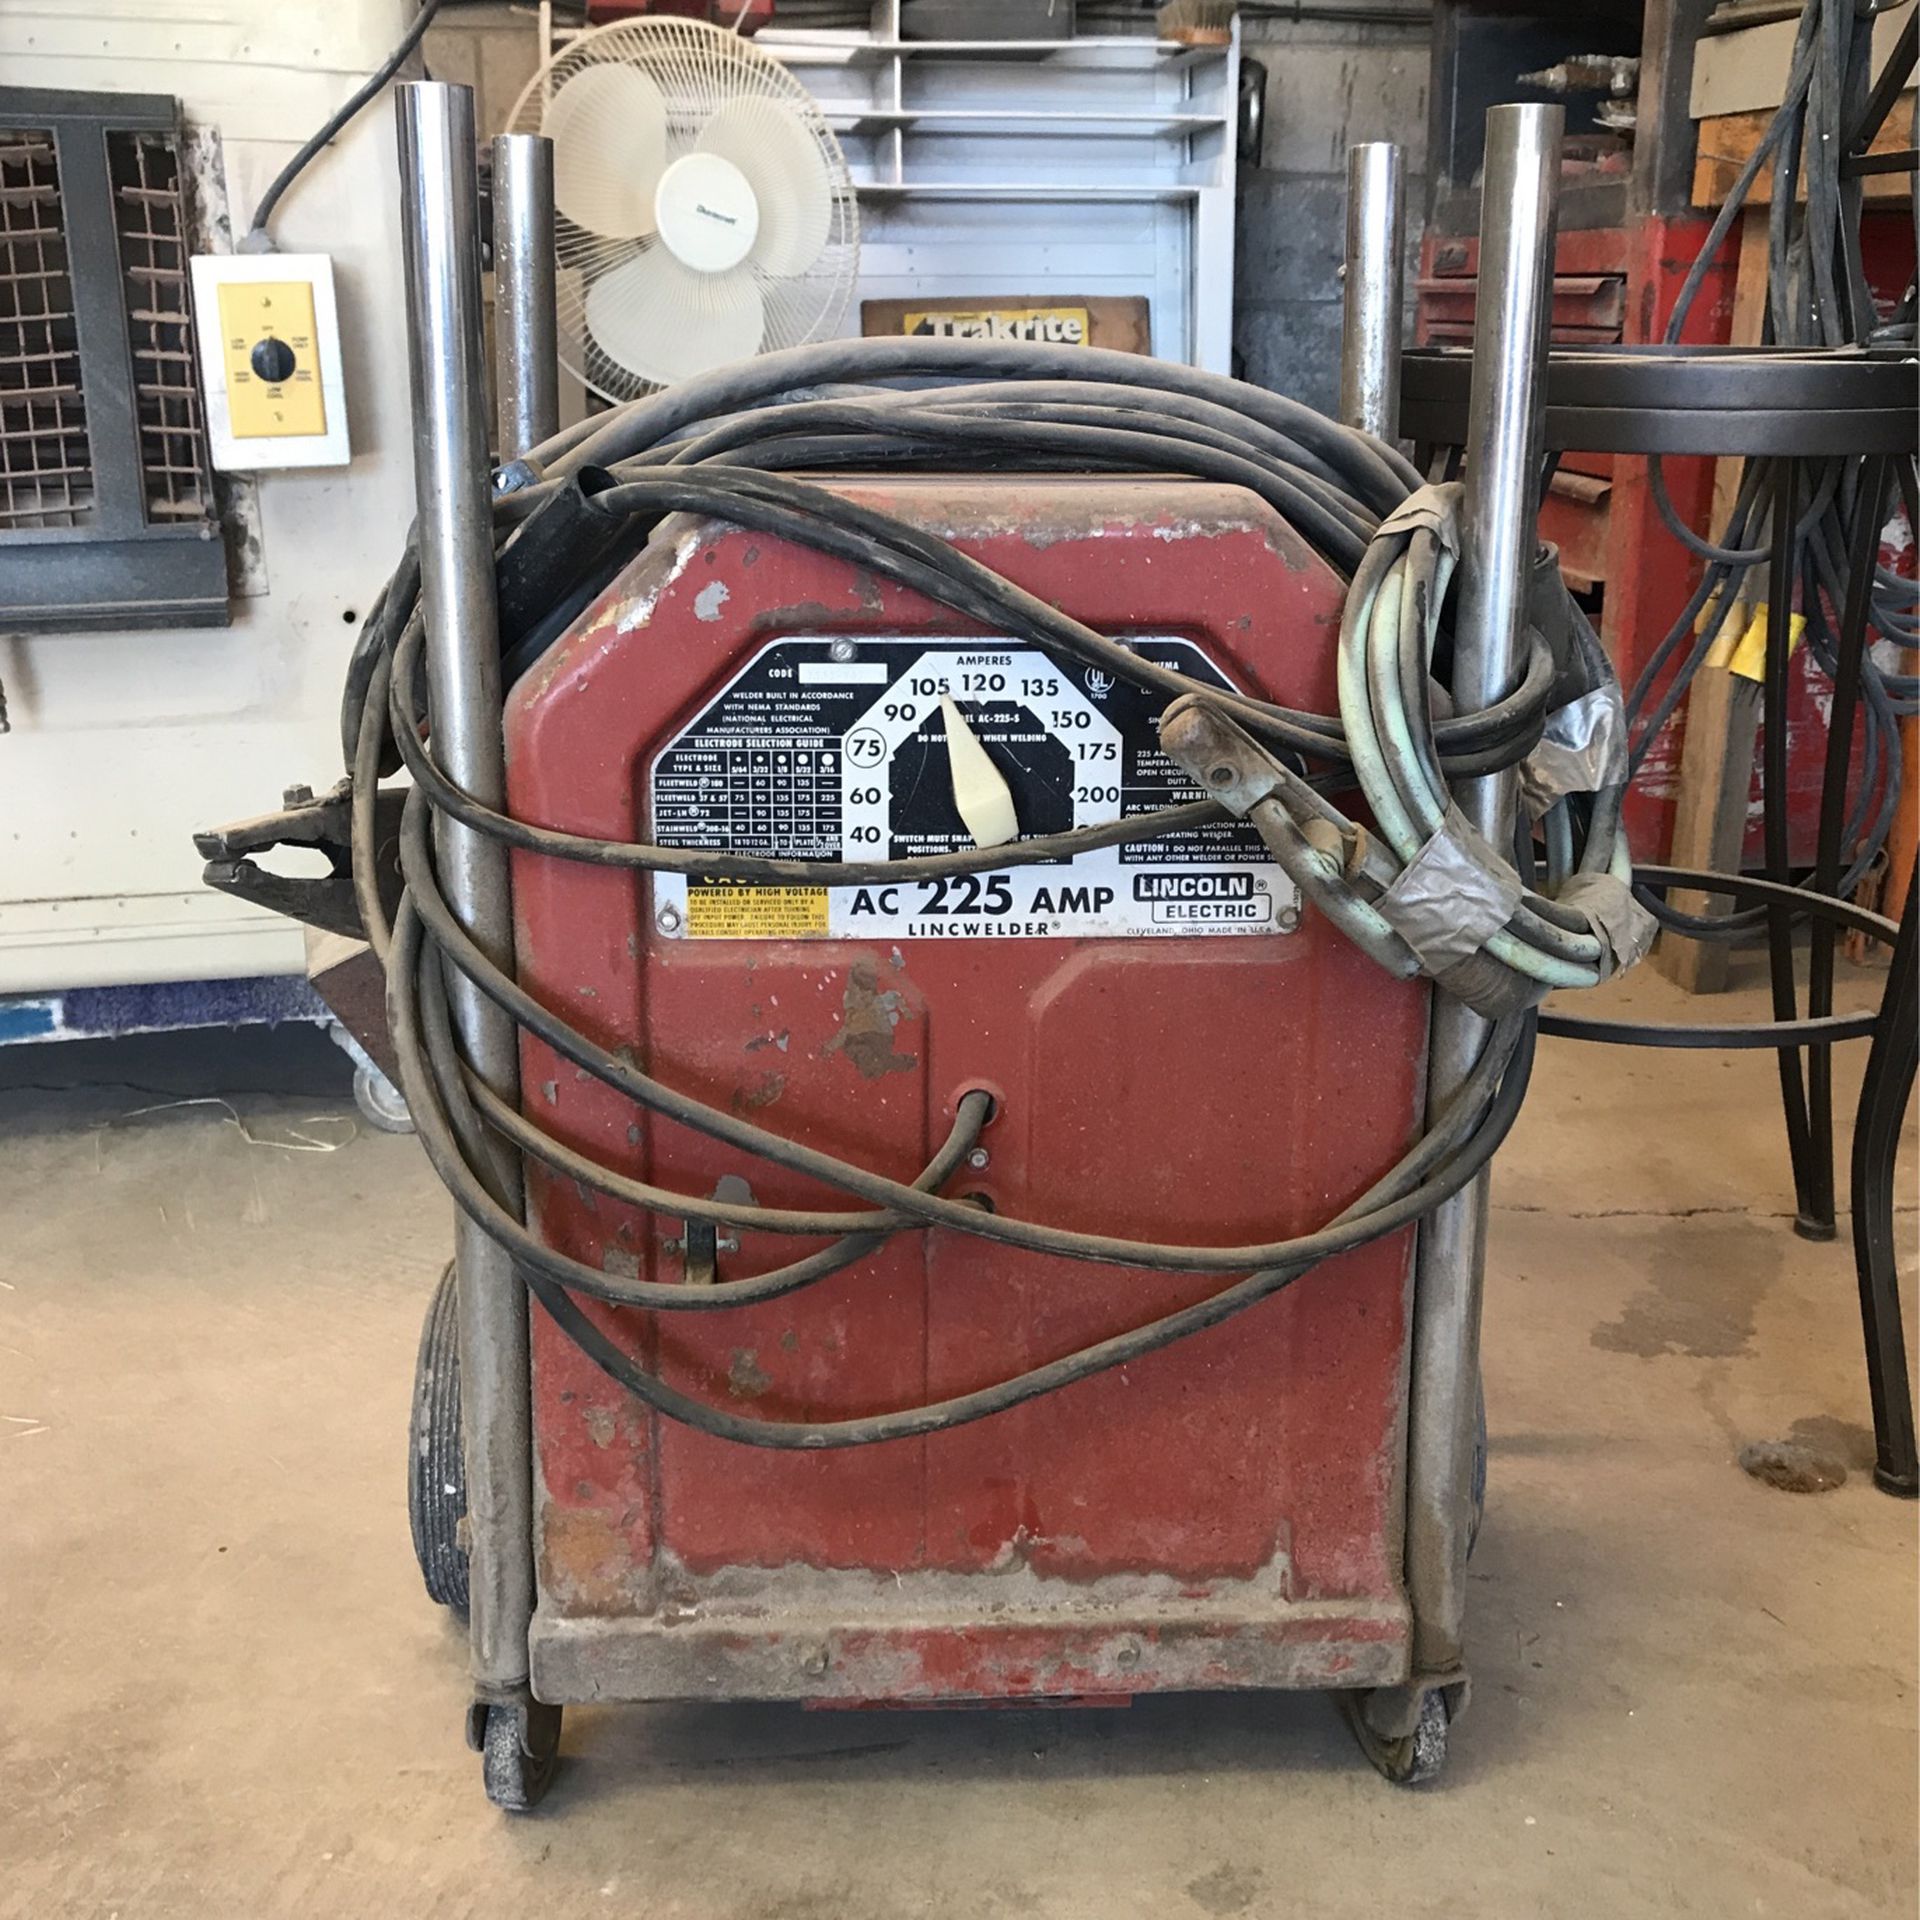 Lincoln 225 AMP Welder, Rods And Box